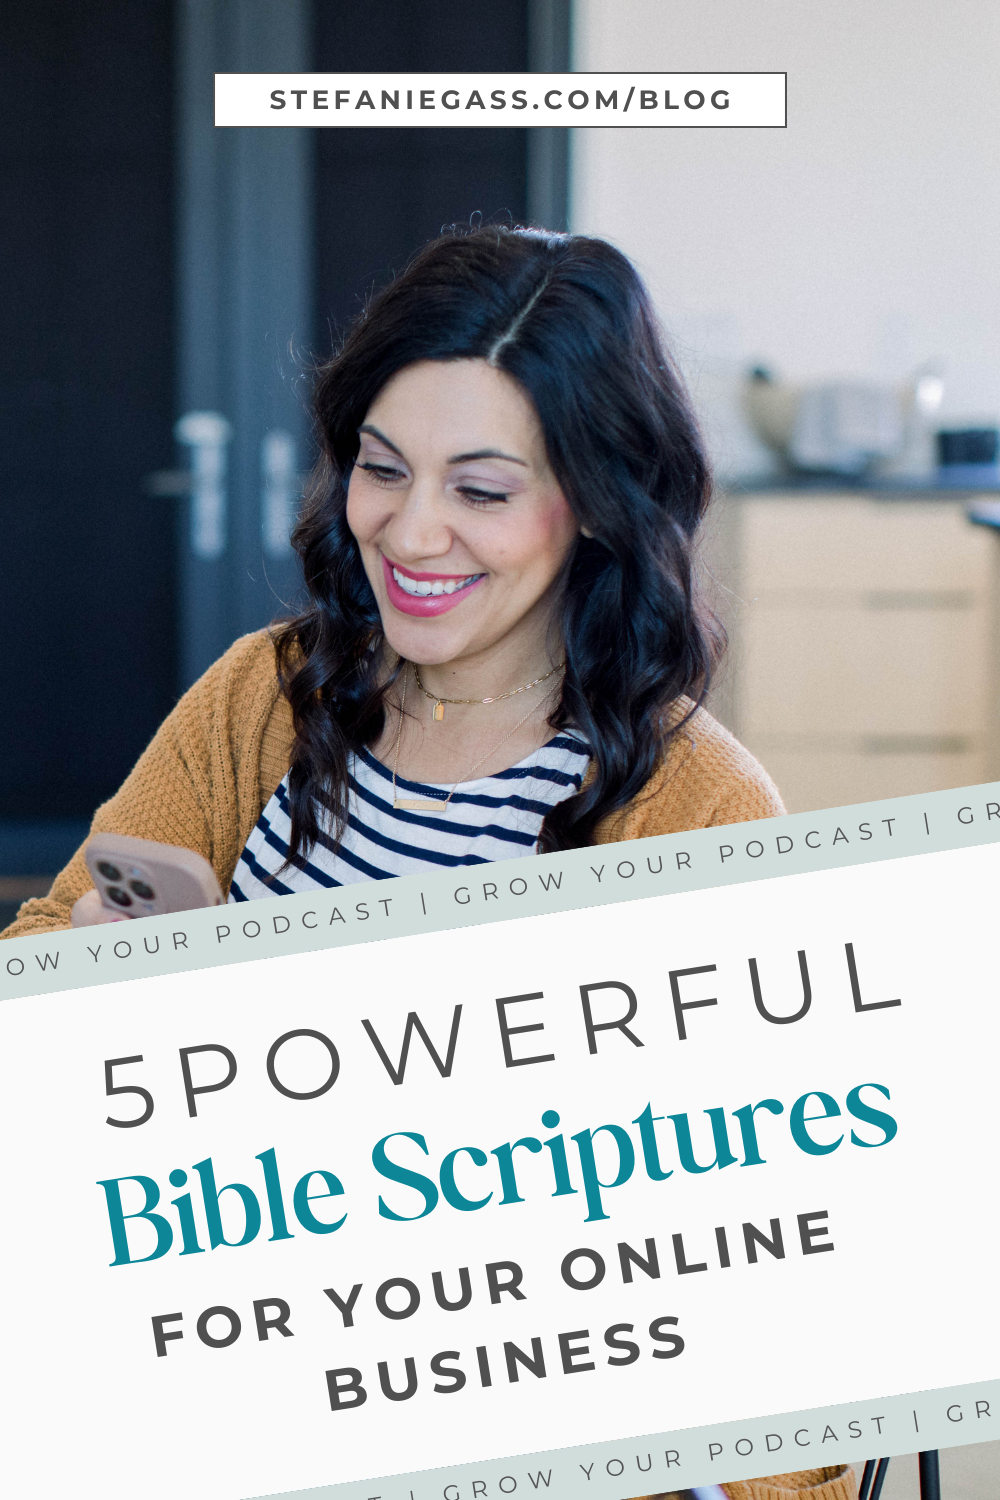 brown haired woman smiling as she looks at her phone Text reads: 5 Powerful Bible Scriptures for your online business